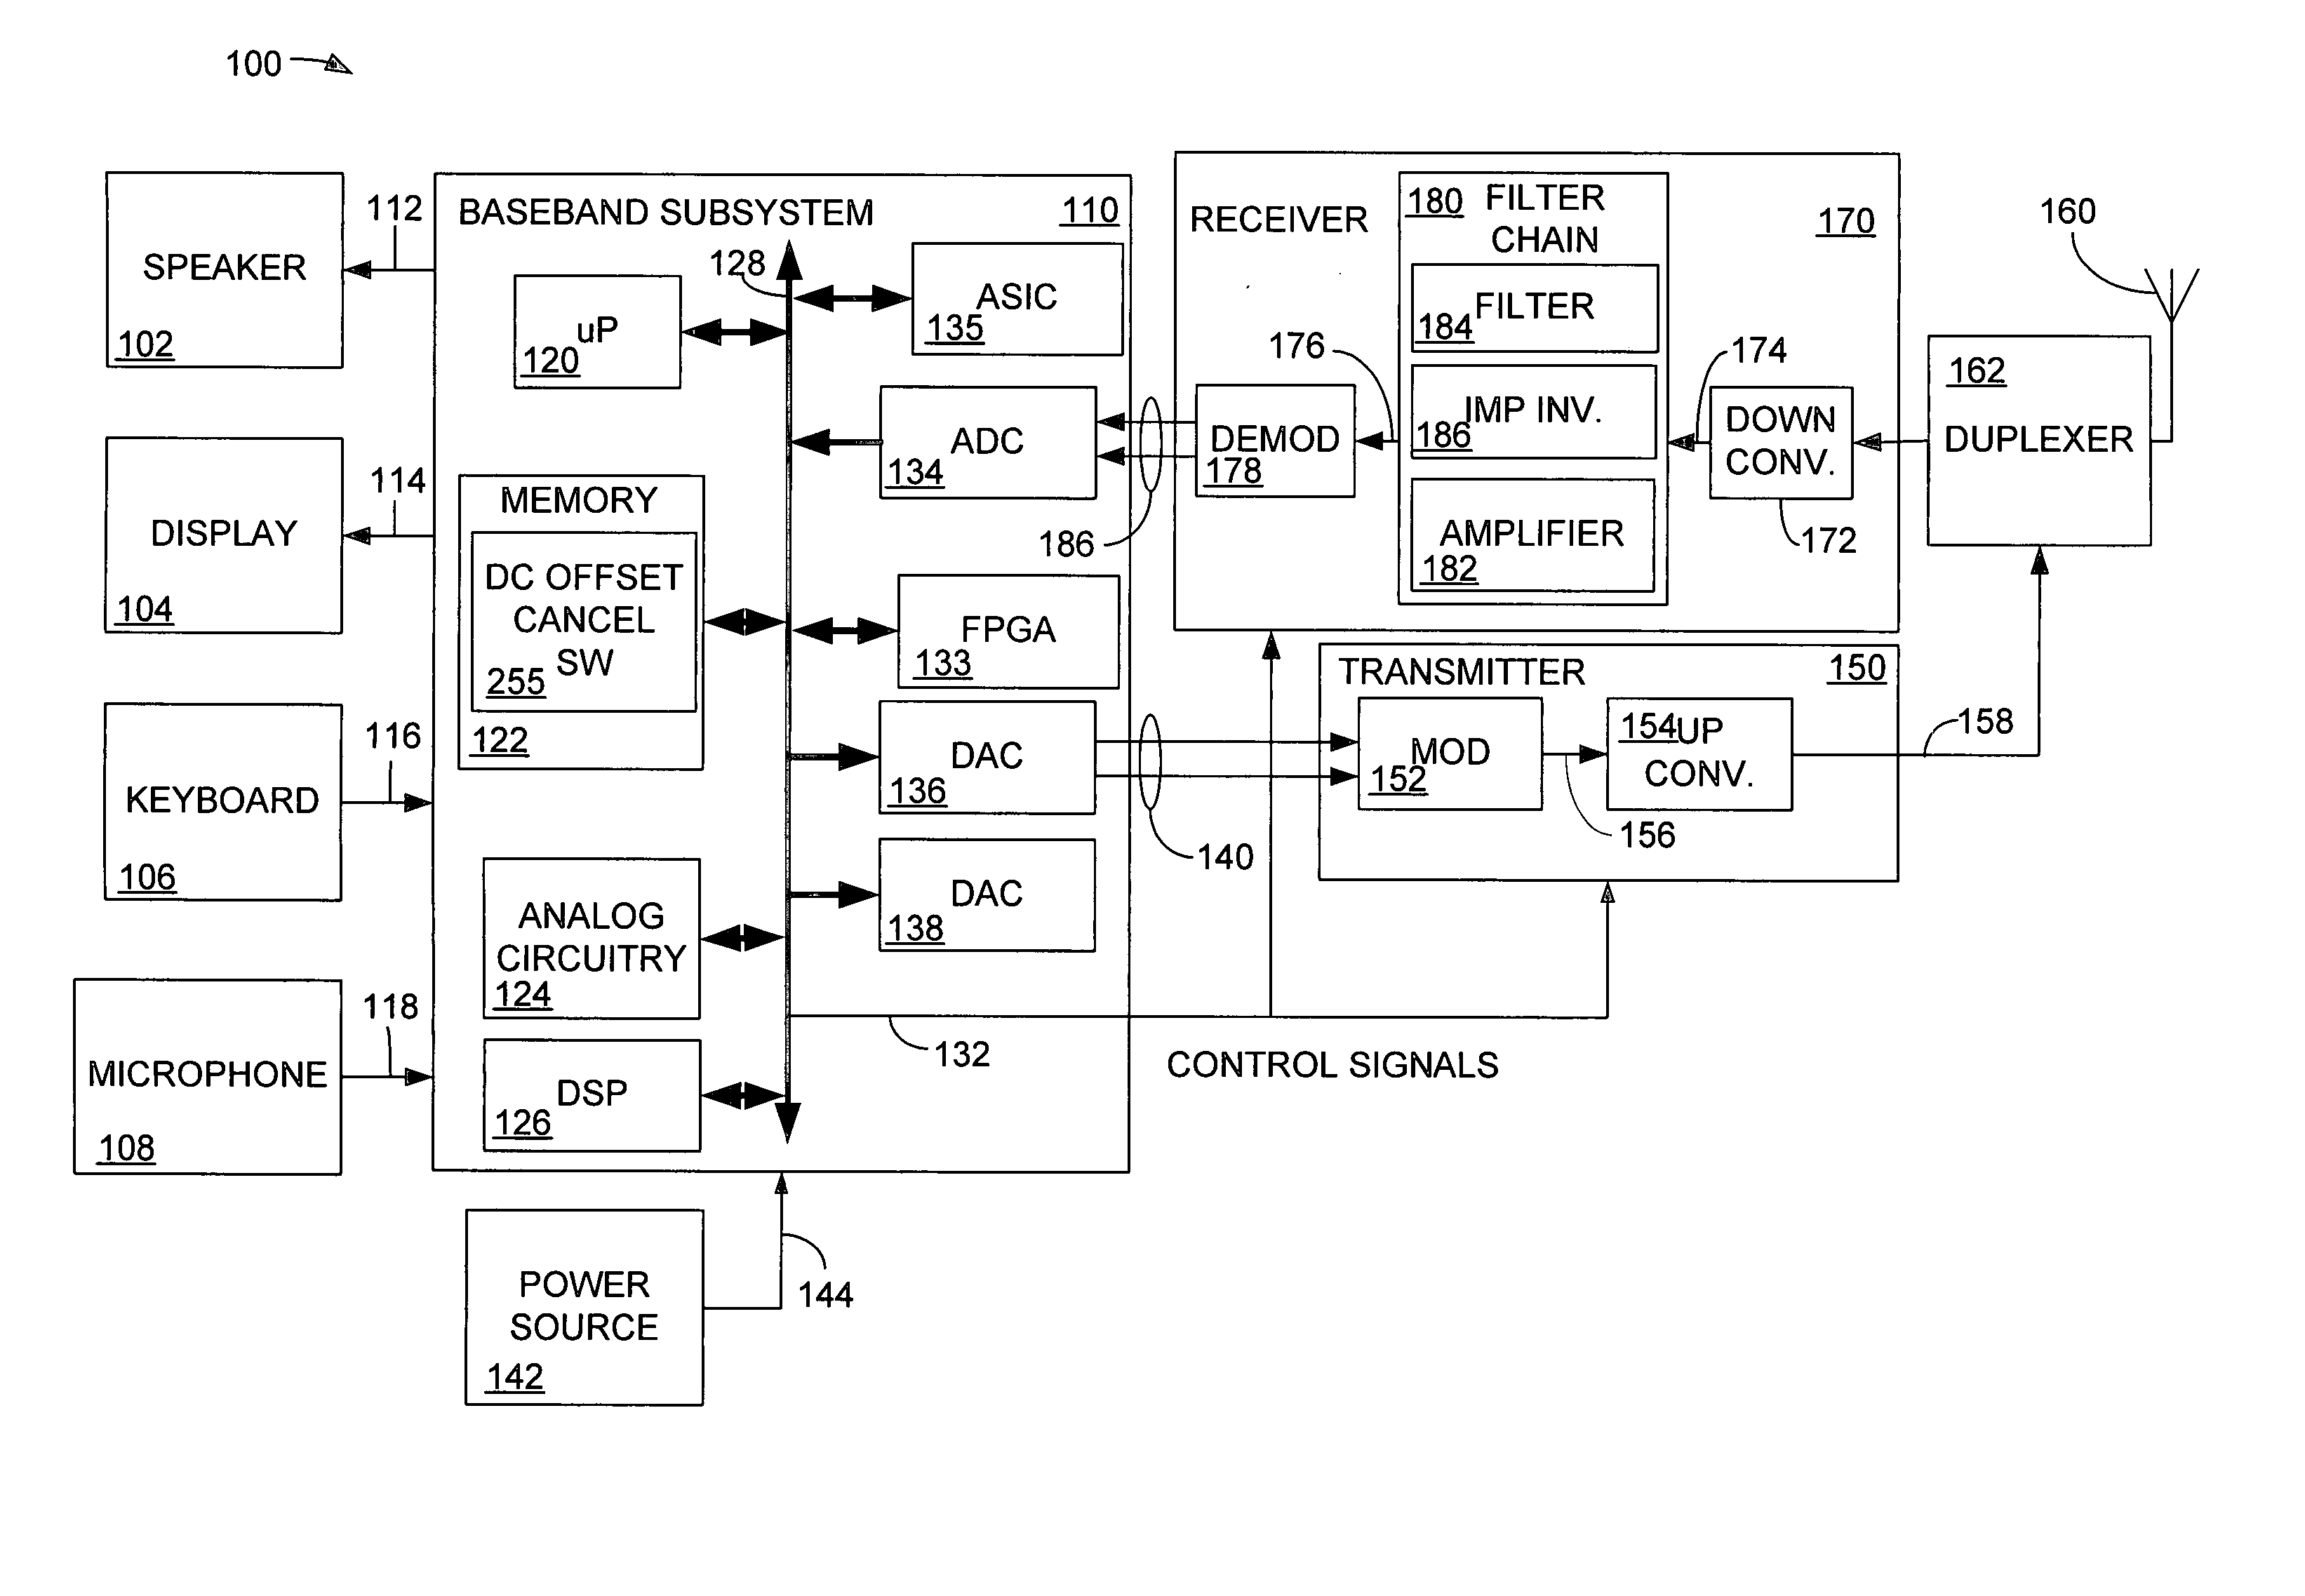 DC offset cancellation in a wireless receiver